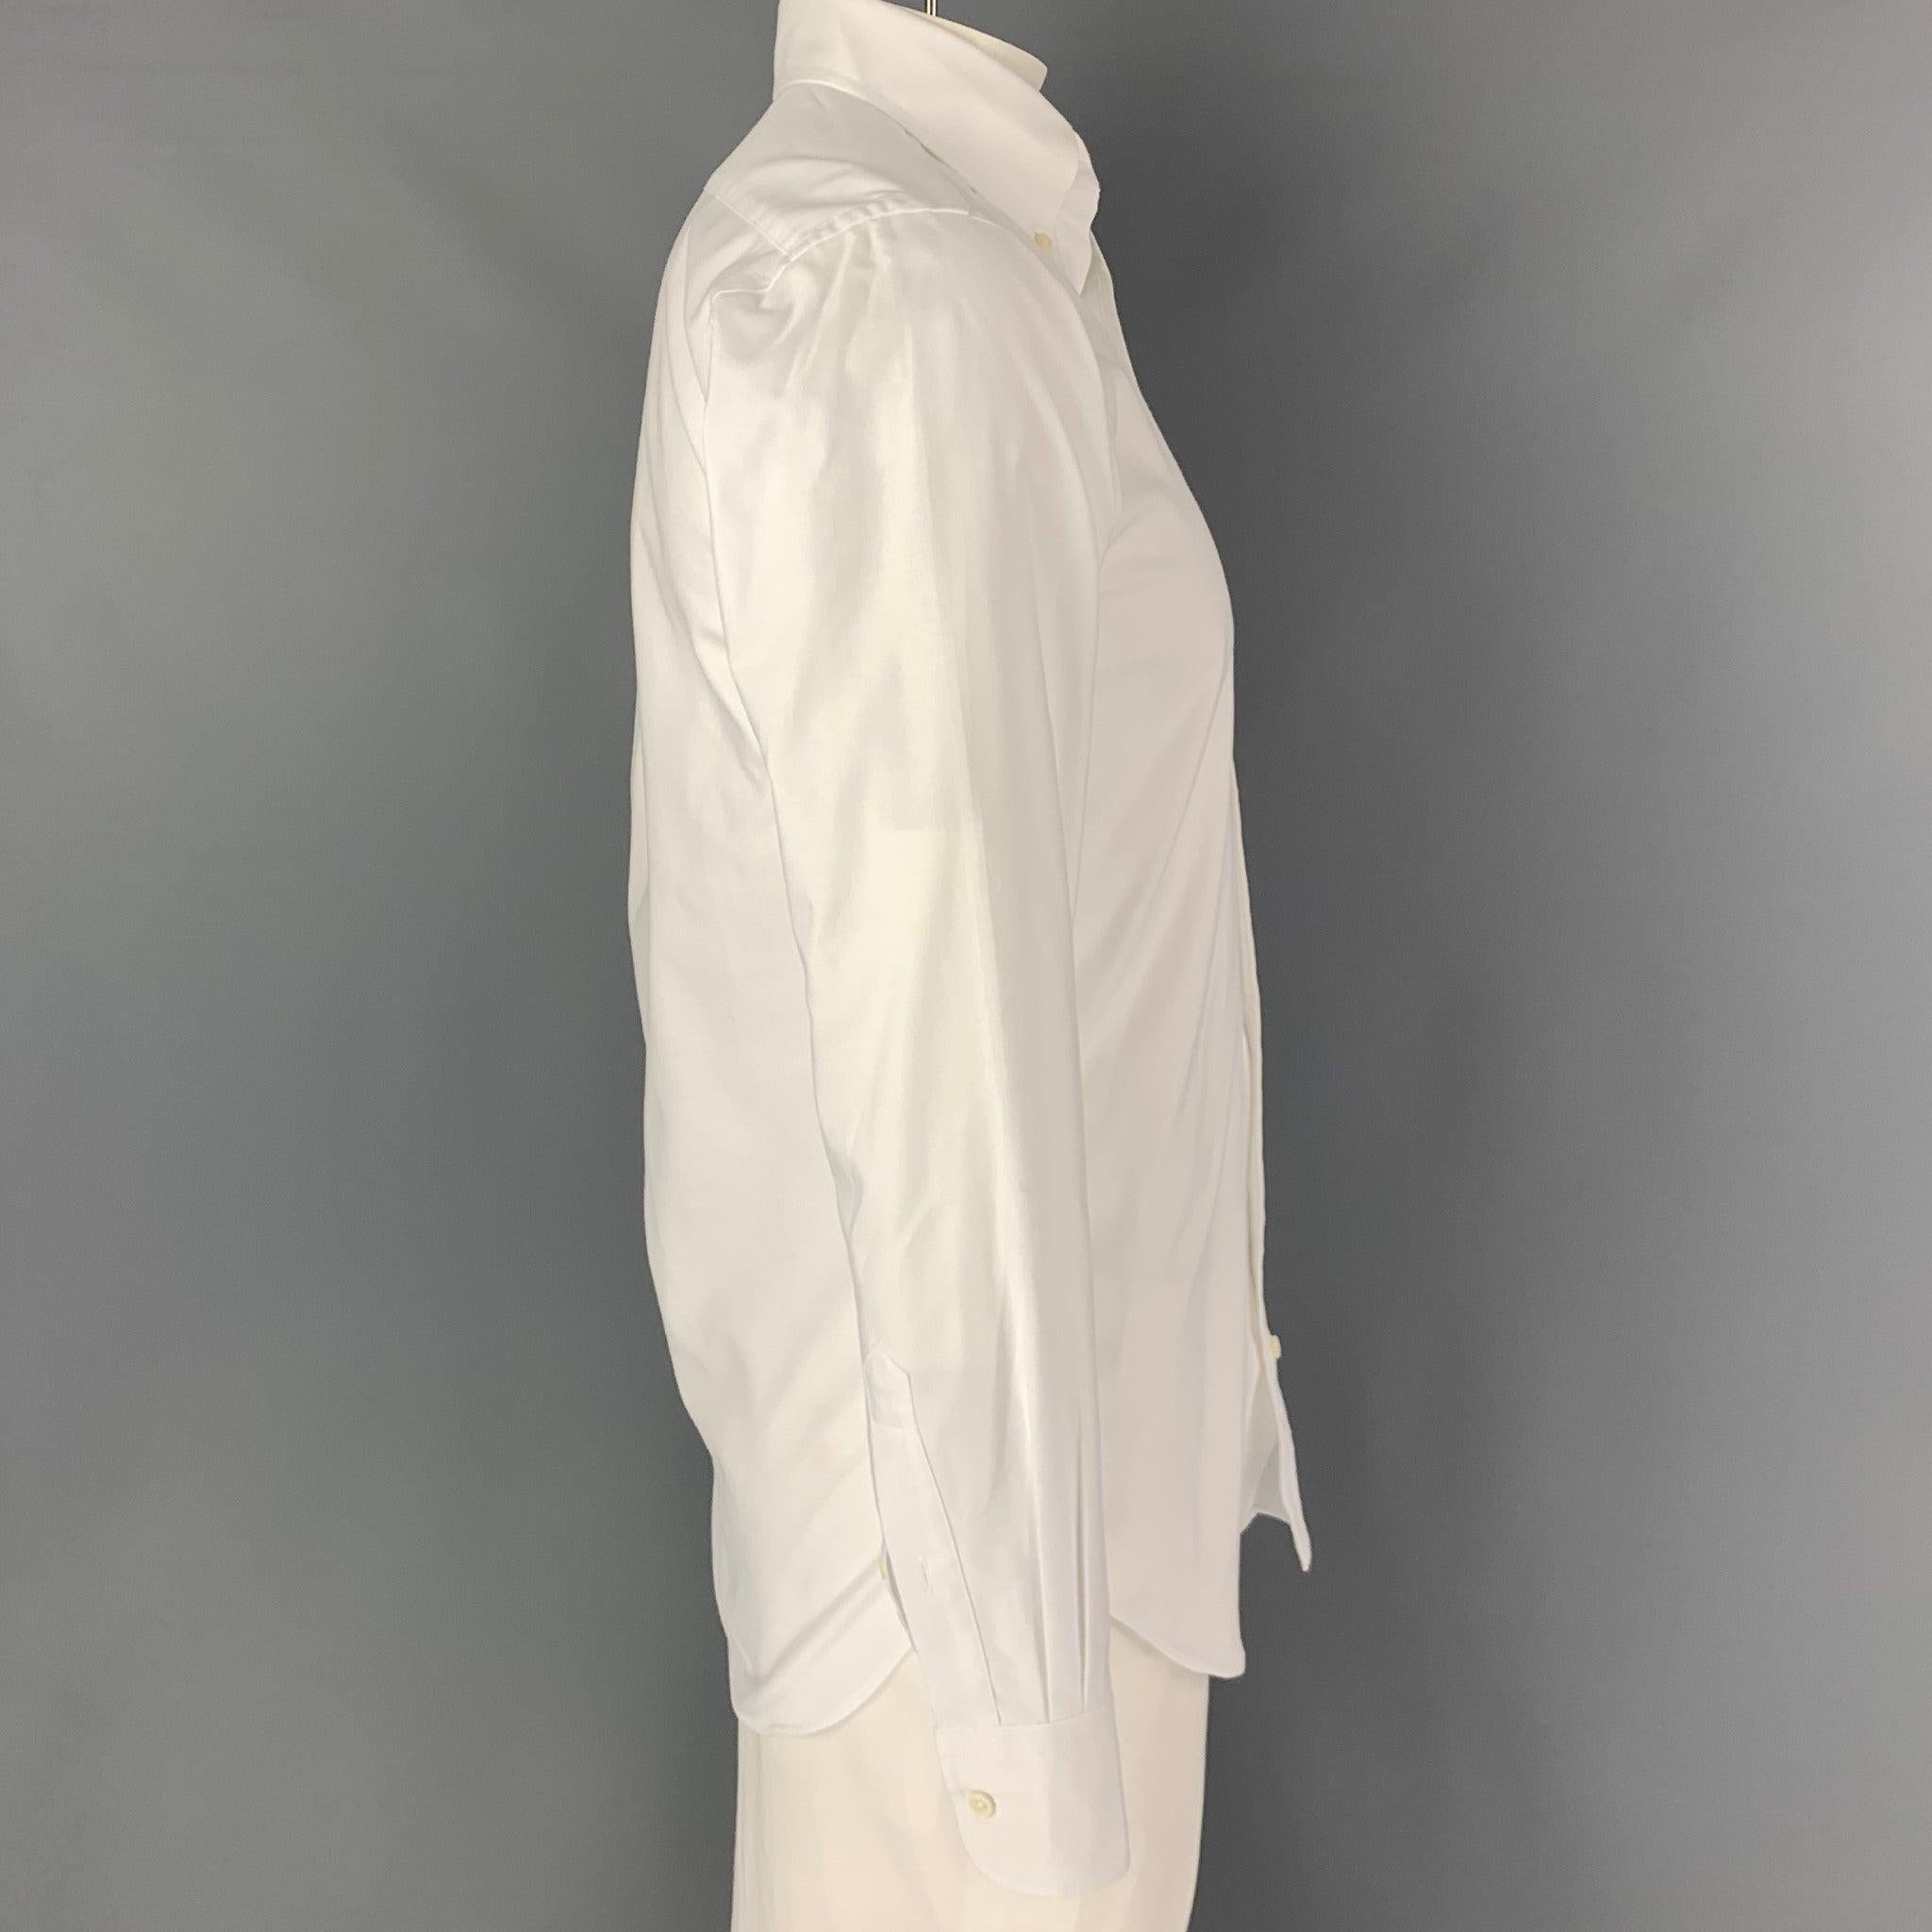 HAMILTON long sleeve shirt comes in a white oxford material featuring a classic style, button down collar, and a button up closure. Excellent
Pre-Owned Condition. Fabric tag removed.  

Marked:   MARCH18  

Measurements: 
 
Shoulder: 18 inches